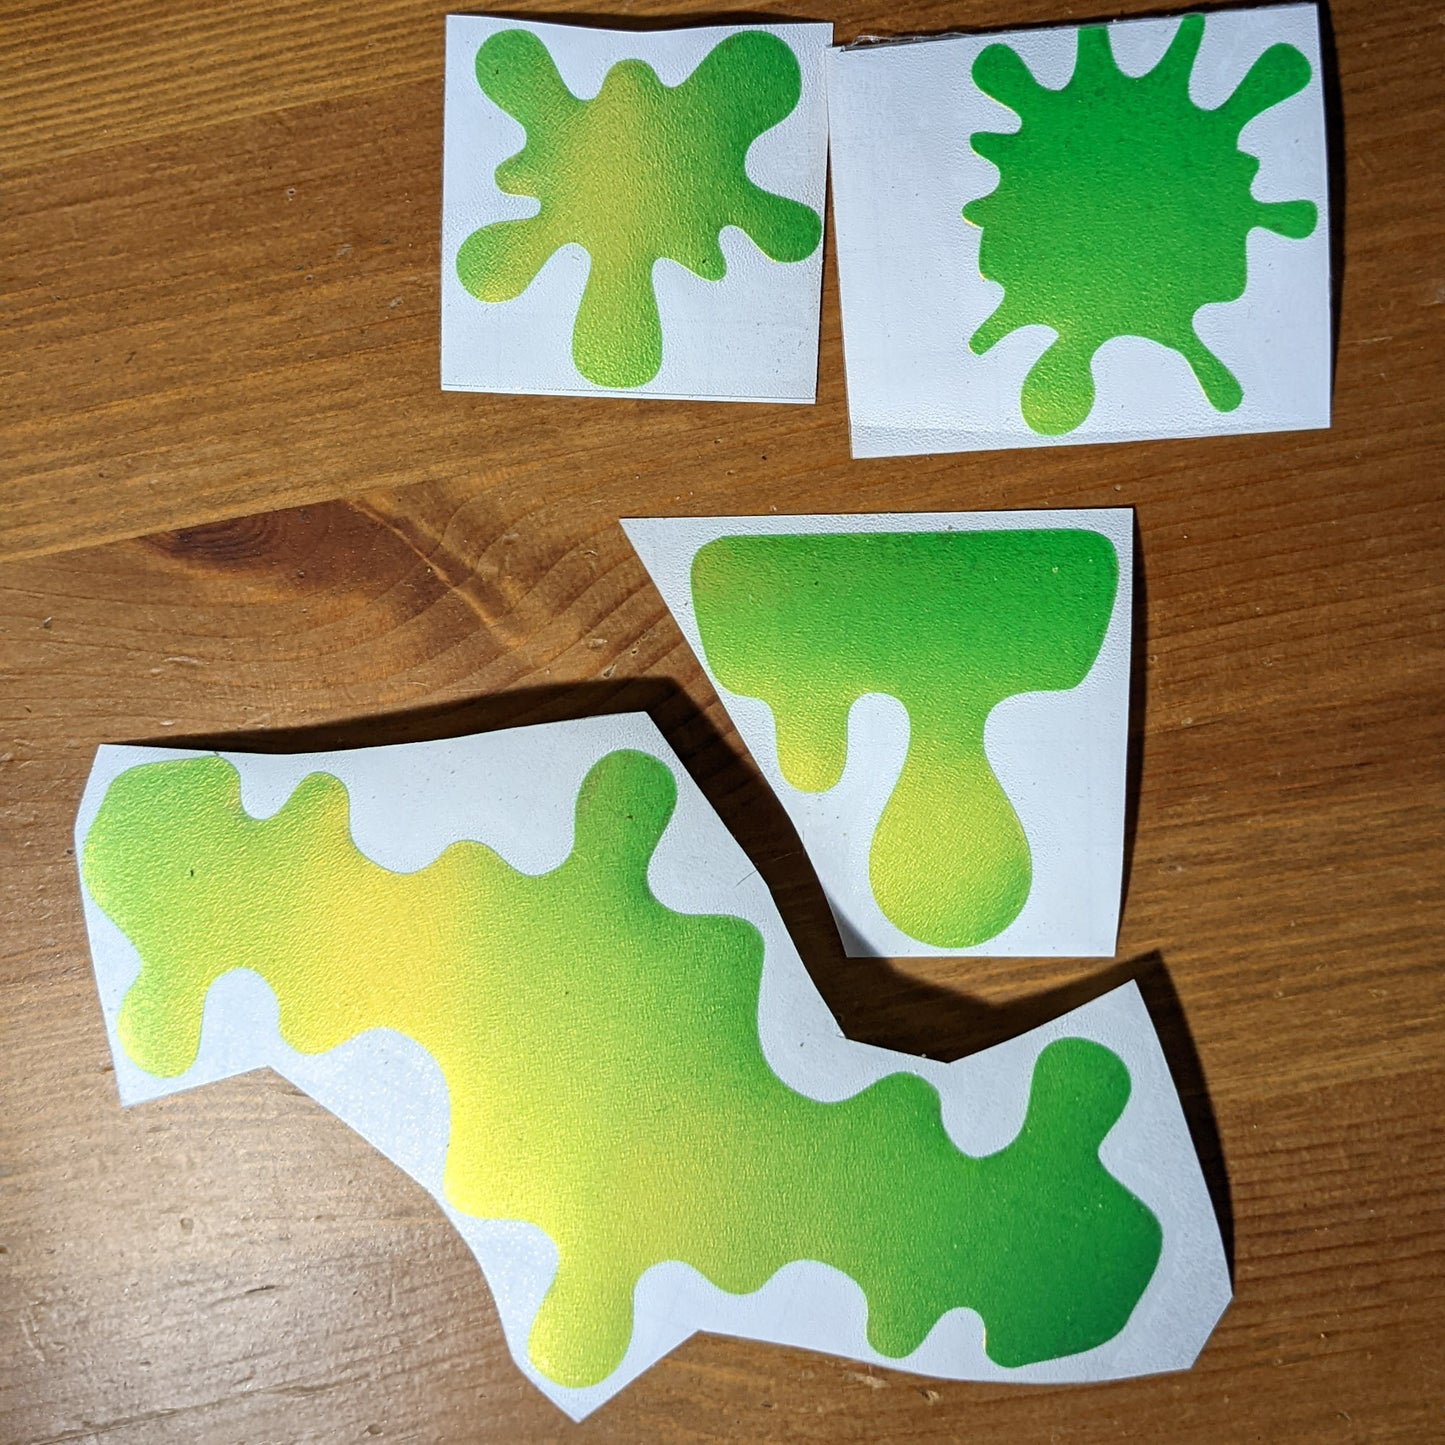 Limited Edition "Slime" Vinyl Decal Pack